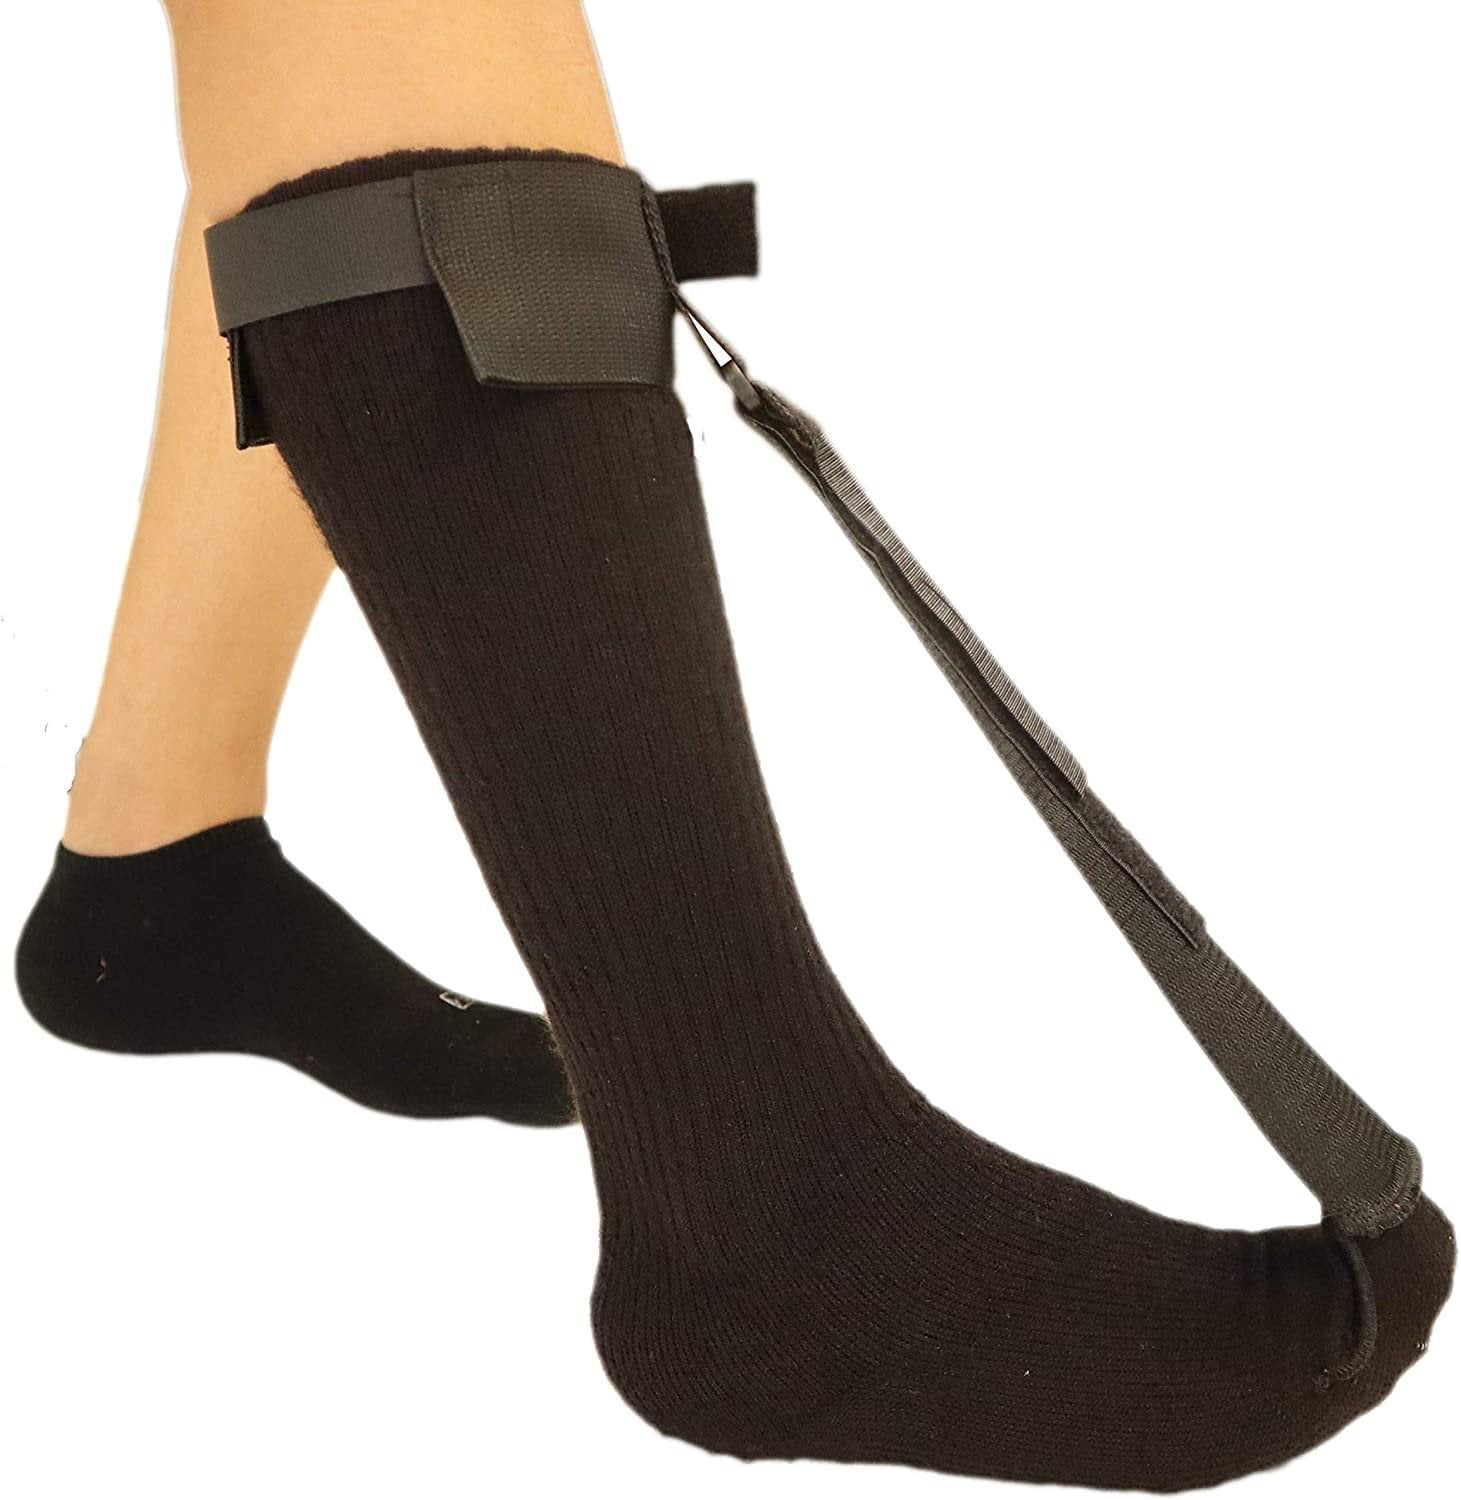 Plantar Fasciitis Stretch Night Sock for Pain Relief from Plantar